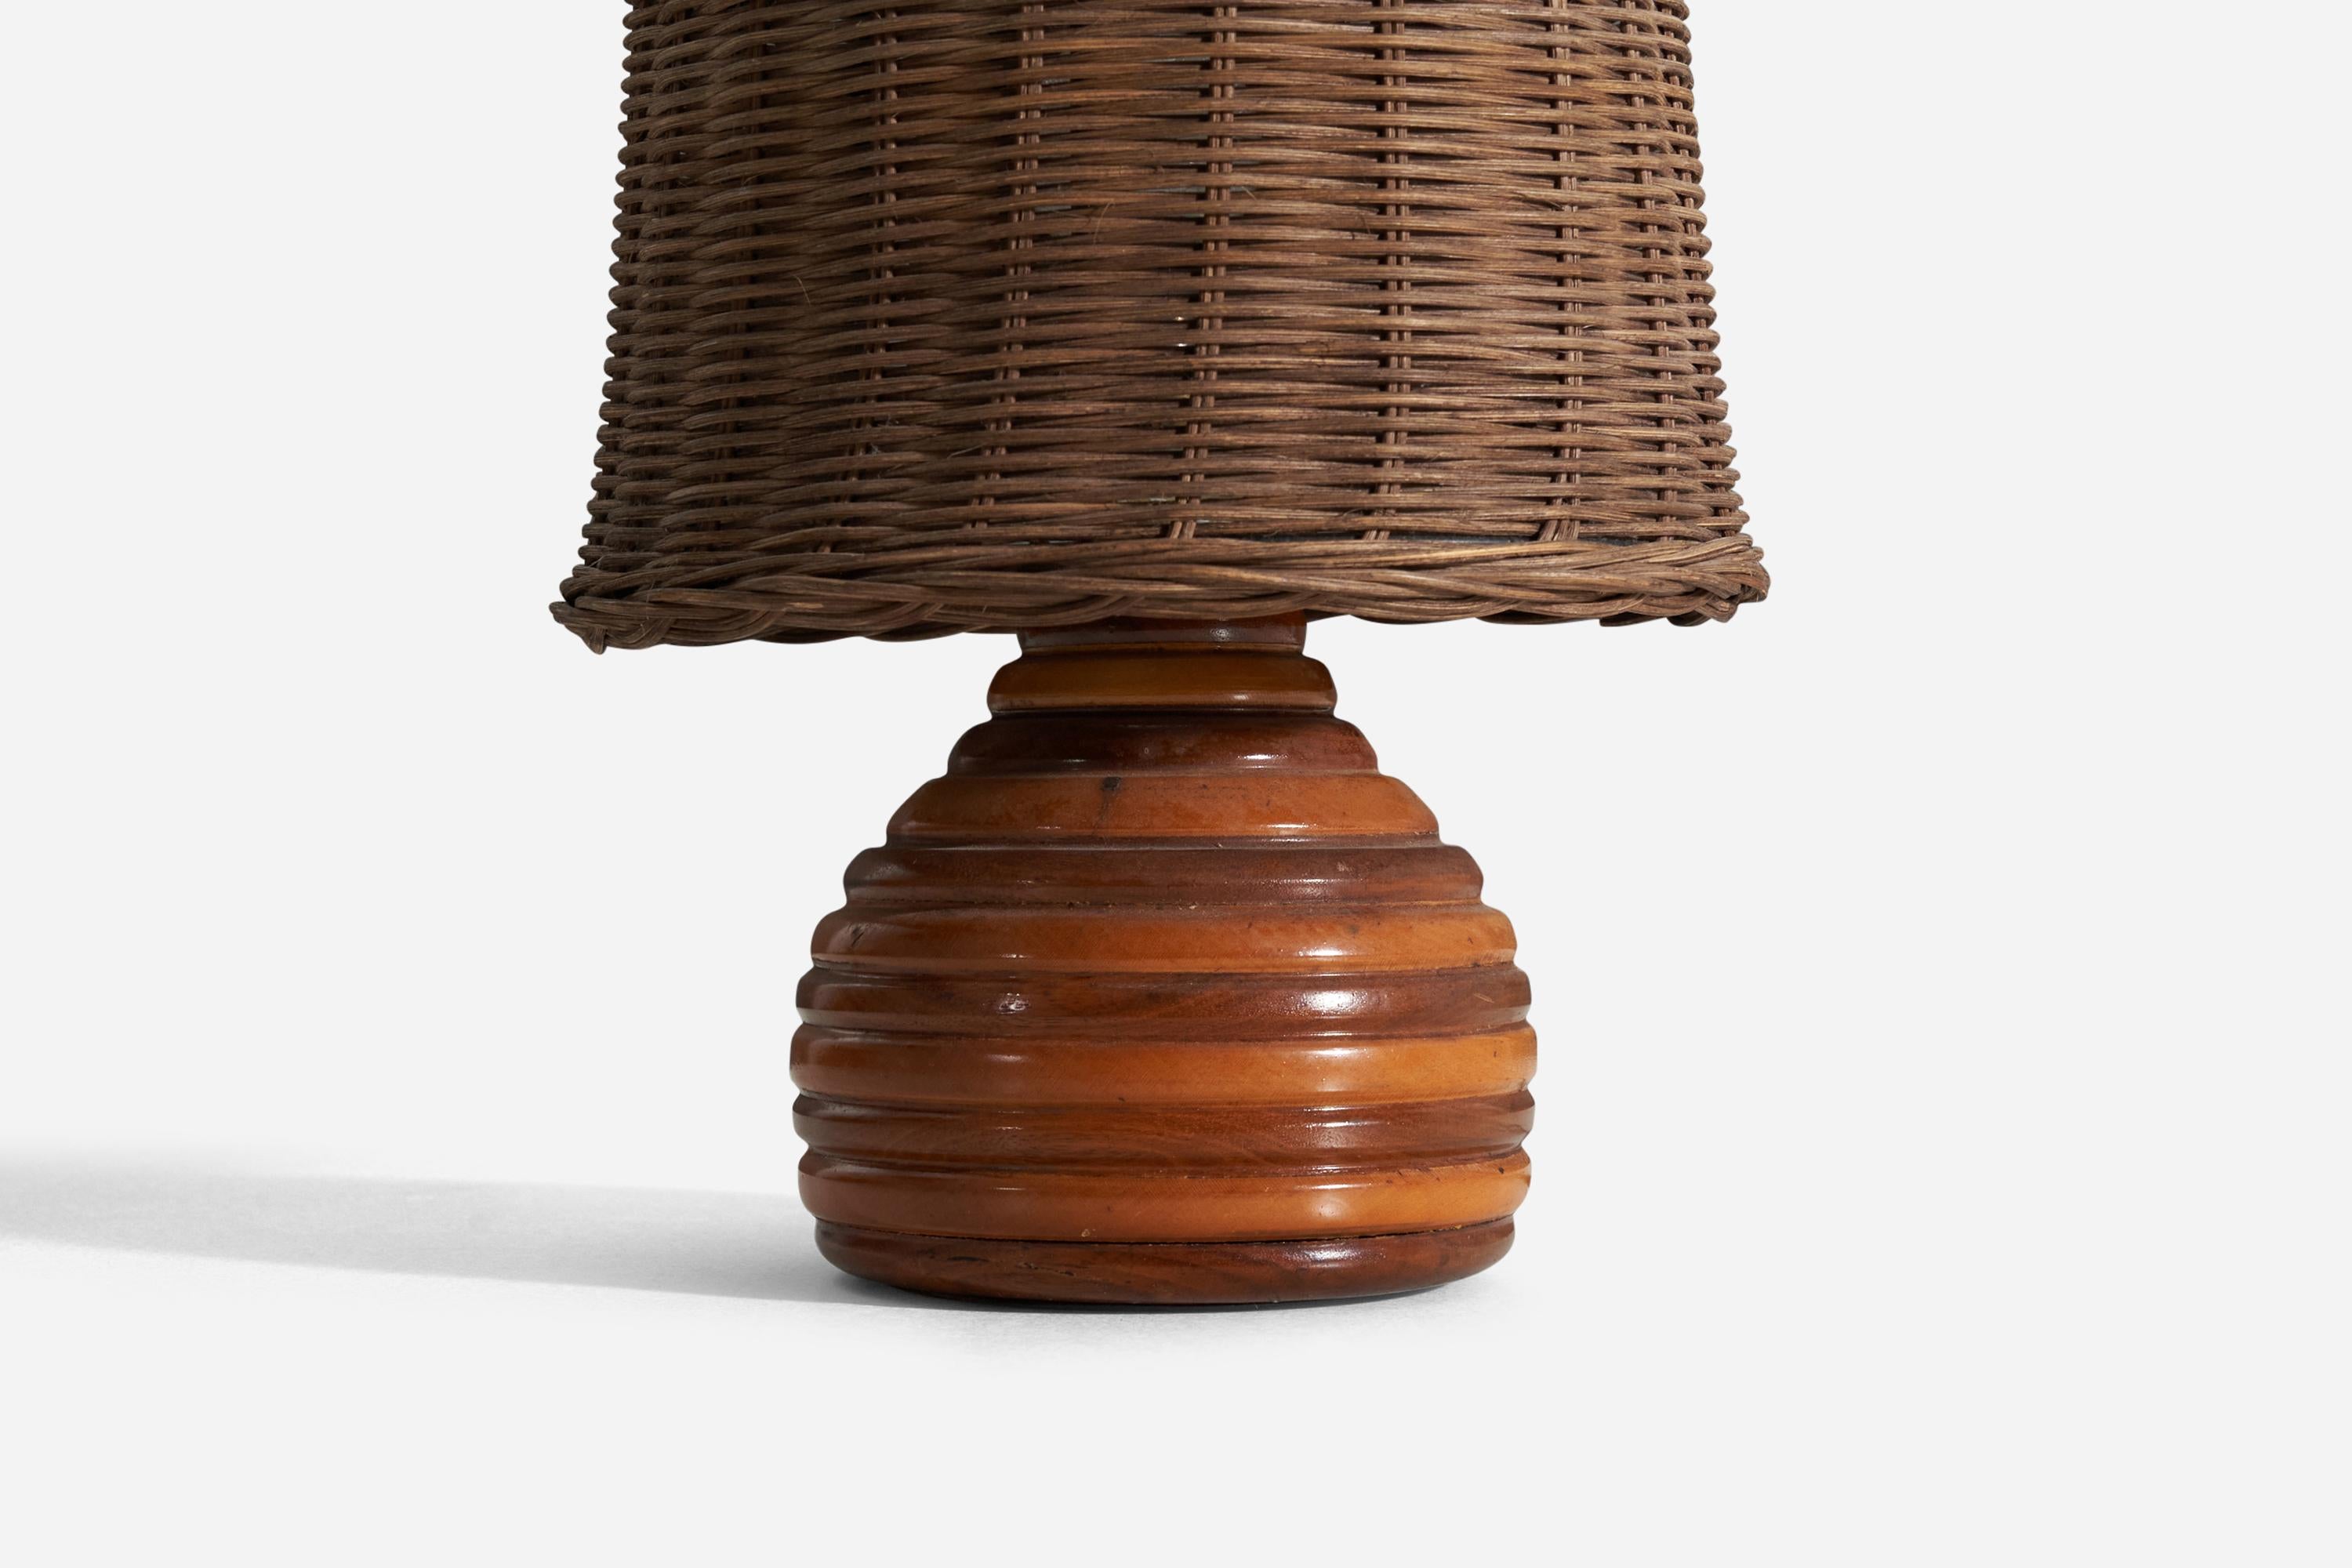 A table lamp. In finely carved wood. Designed and produced by unknown maker. Presents with beautiful original patina to wood and brass.

Sold with an assorted vintage rattan lampshade lampshade. Stated dimensions including lampshade as is